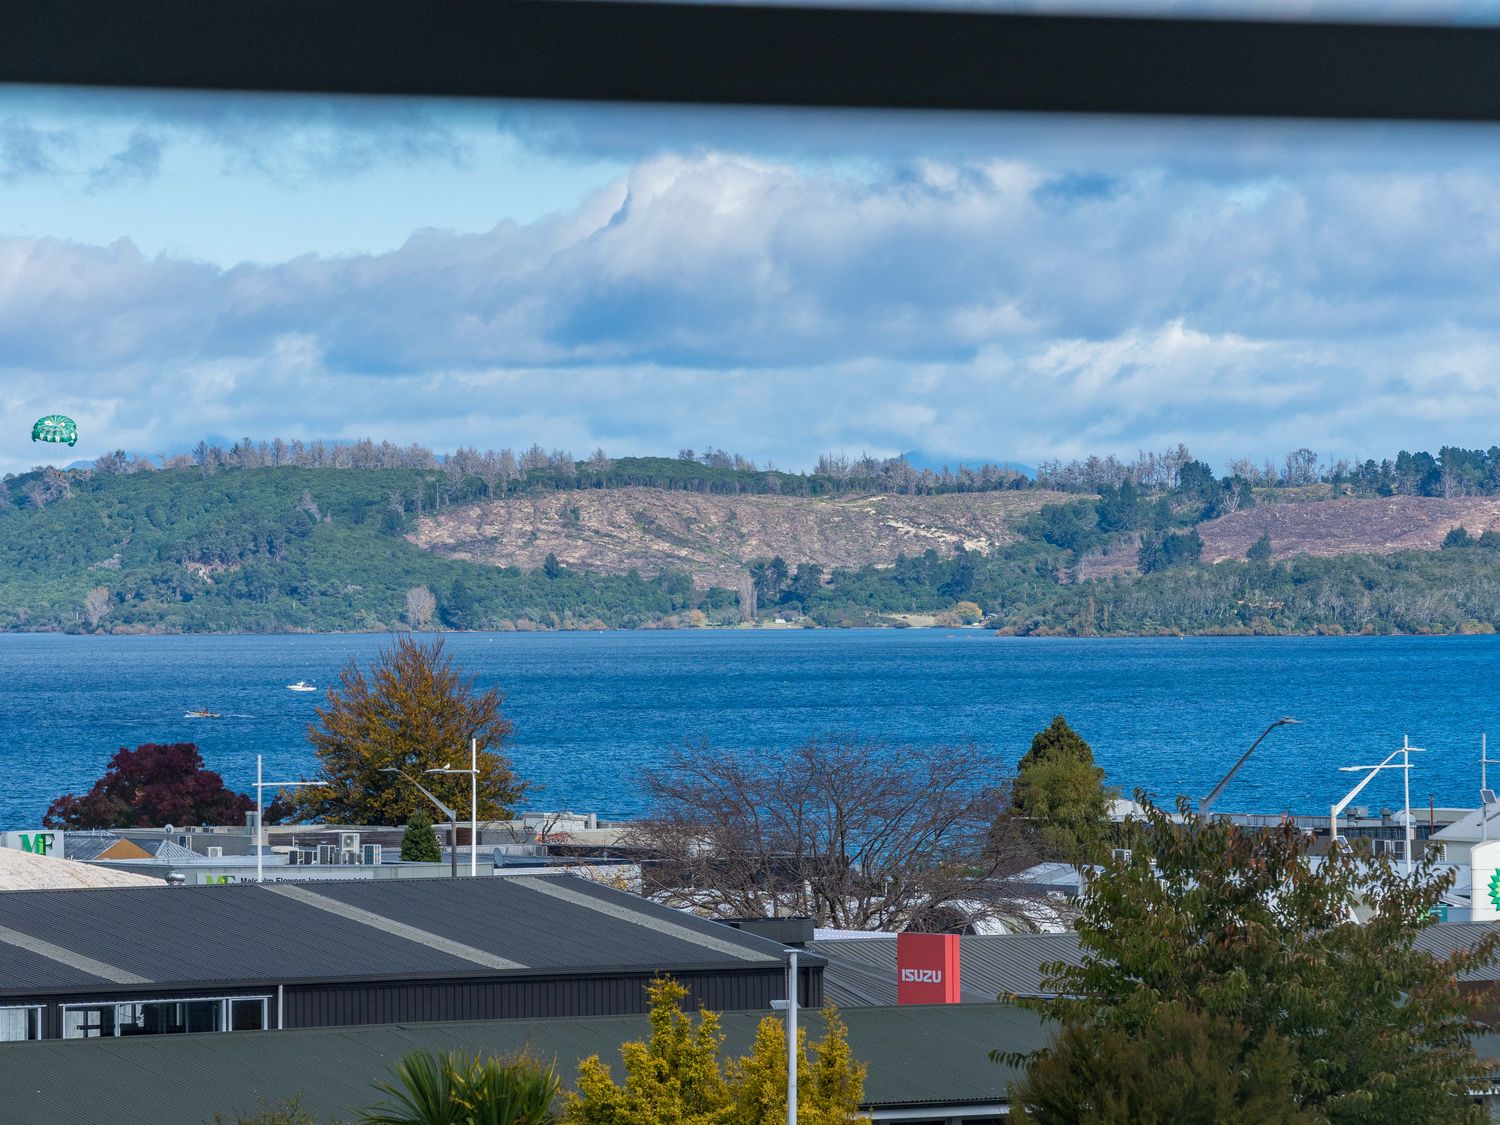 Lakefront Escape - Taupo Holiday Home -  - 1155808 - photo 1